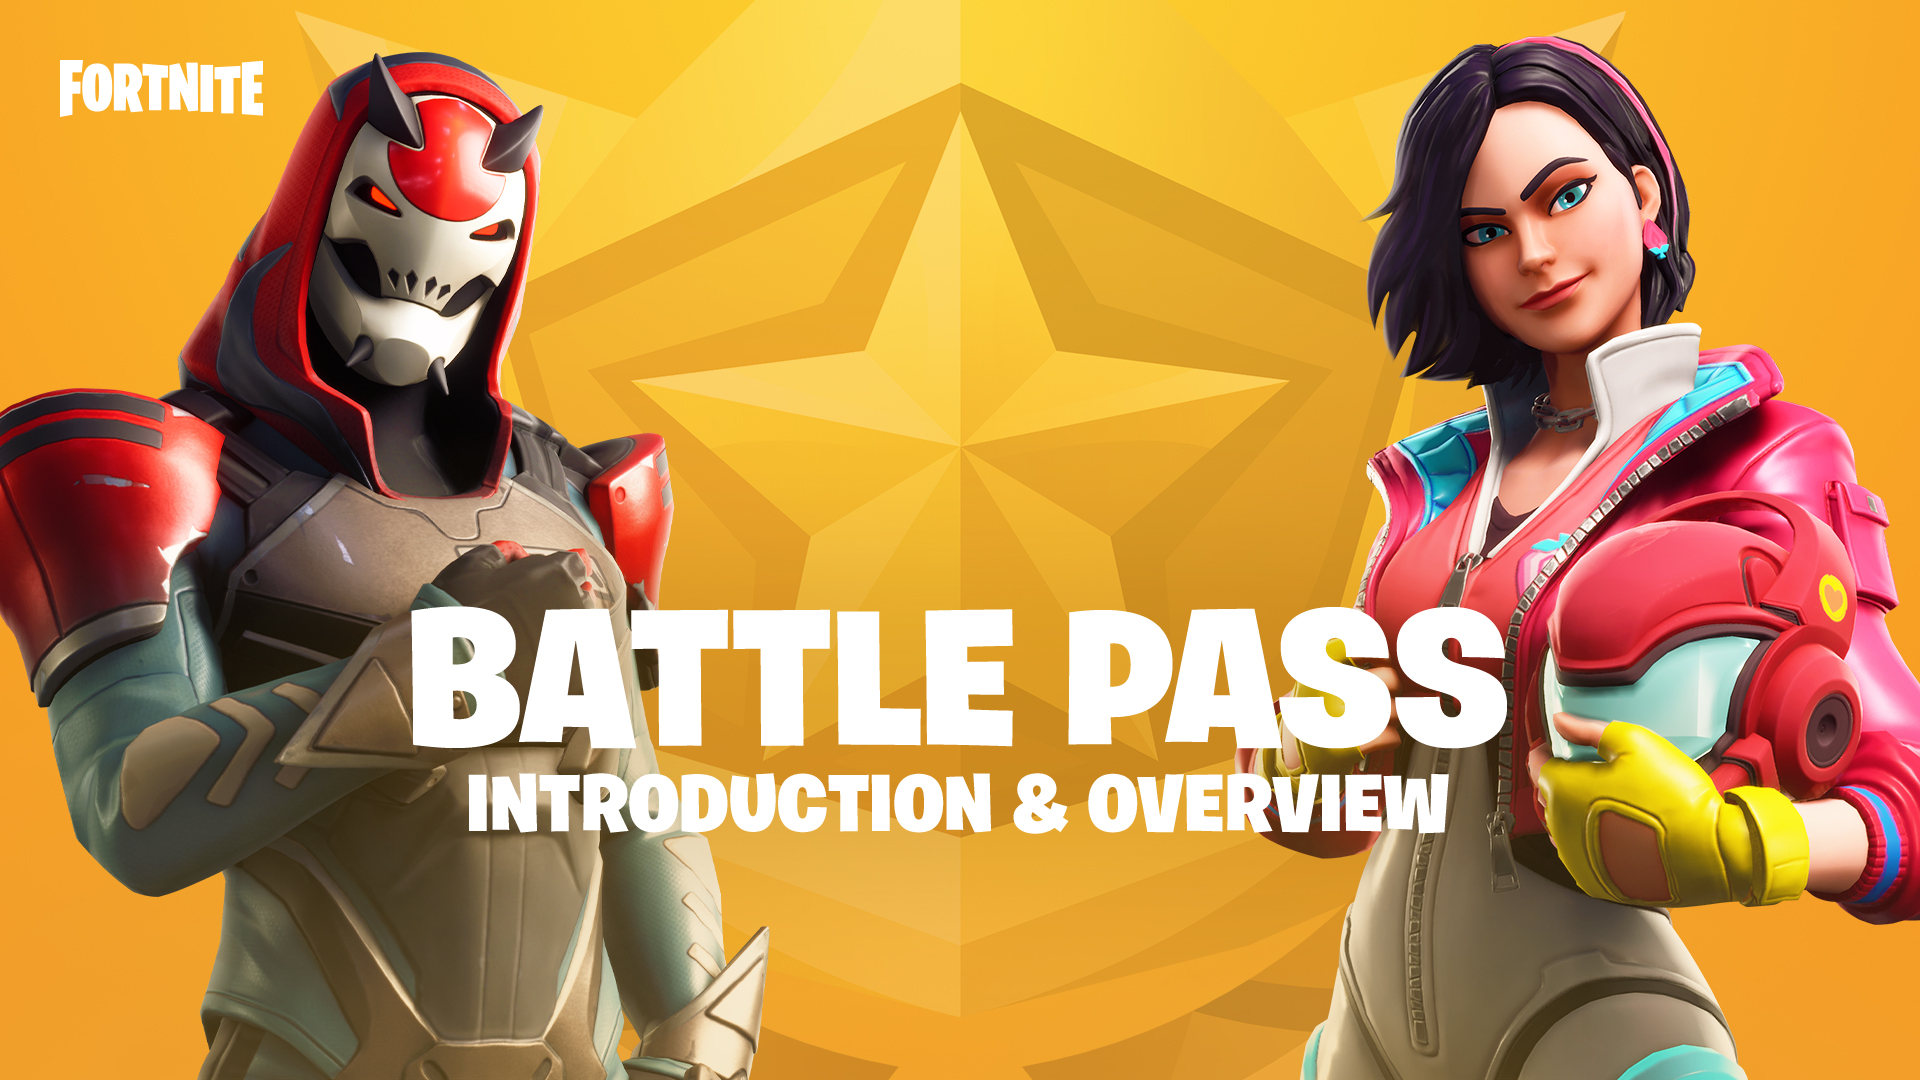 fortnite battle pass introduction and overview two fortnite characters posing with a large - fortnite laguna starter pack code